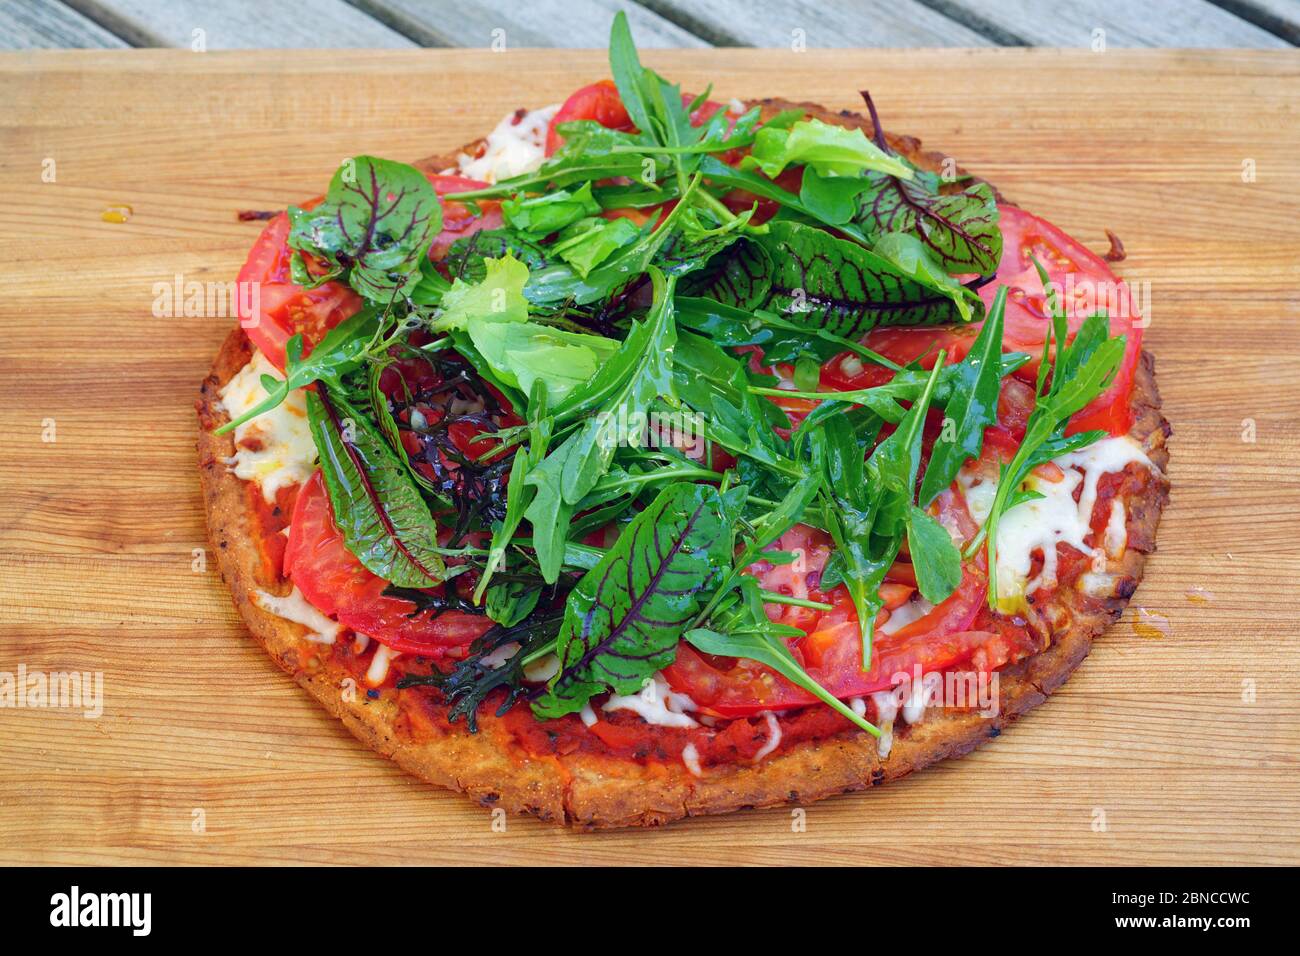 A pizza with red sauce and fresh salad on a gluten-free cauliflower crust Stock Photo